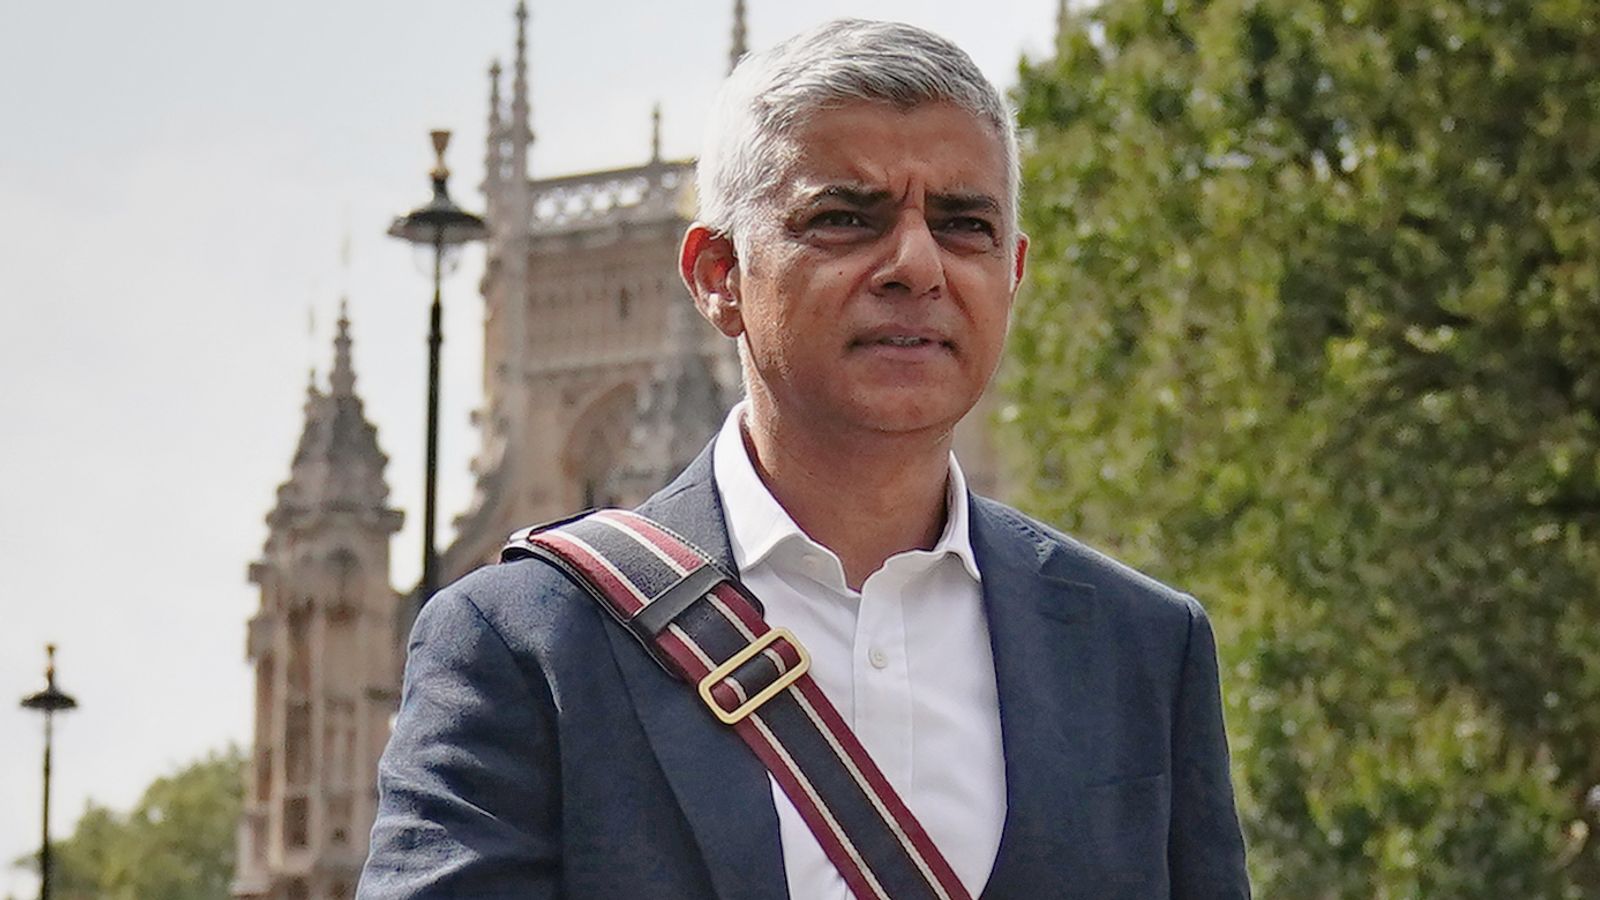 Sadiq Khan accuses government of 'weaponising air pollution'ahead of London ULEZ expansion